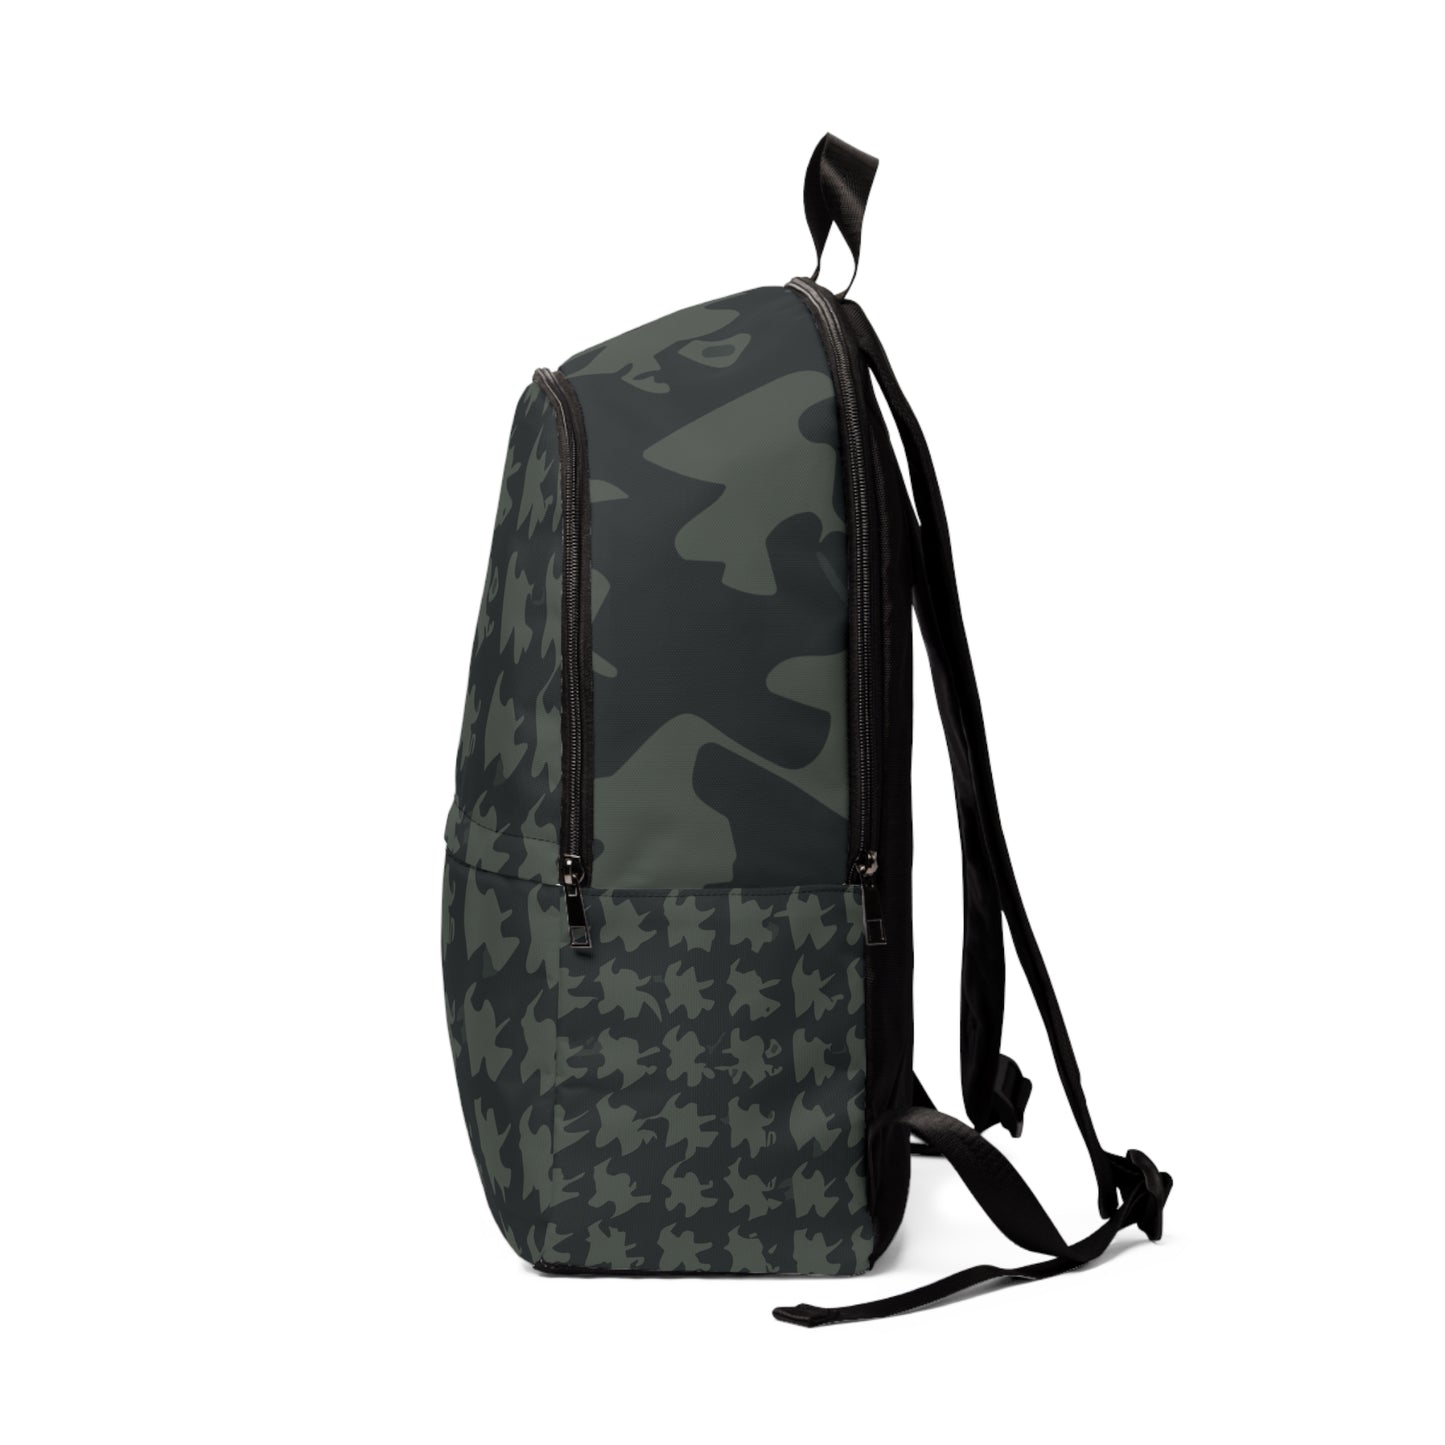 Vampire Art Grunge Houndstooth Black and Charcoal Fabric Backpack